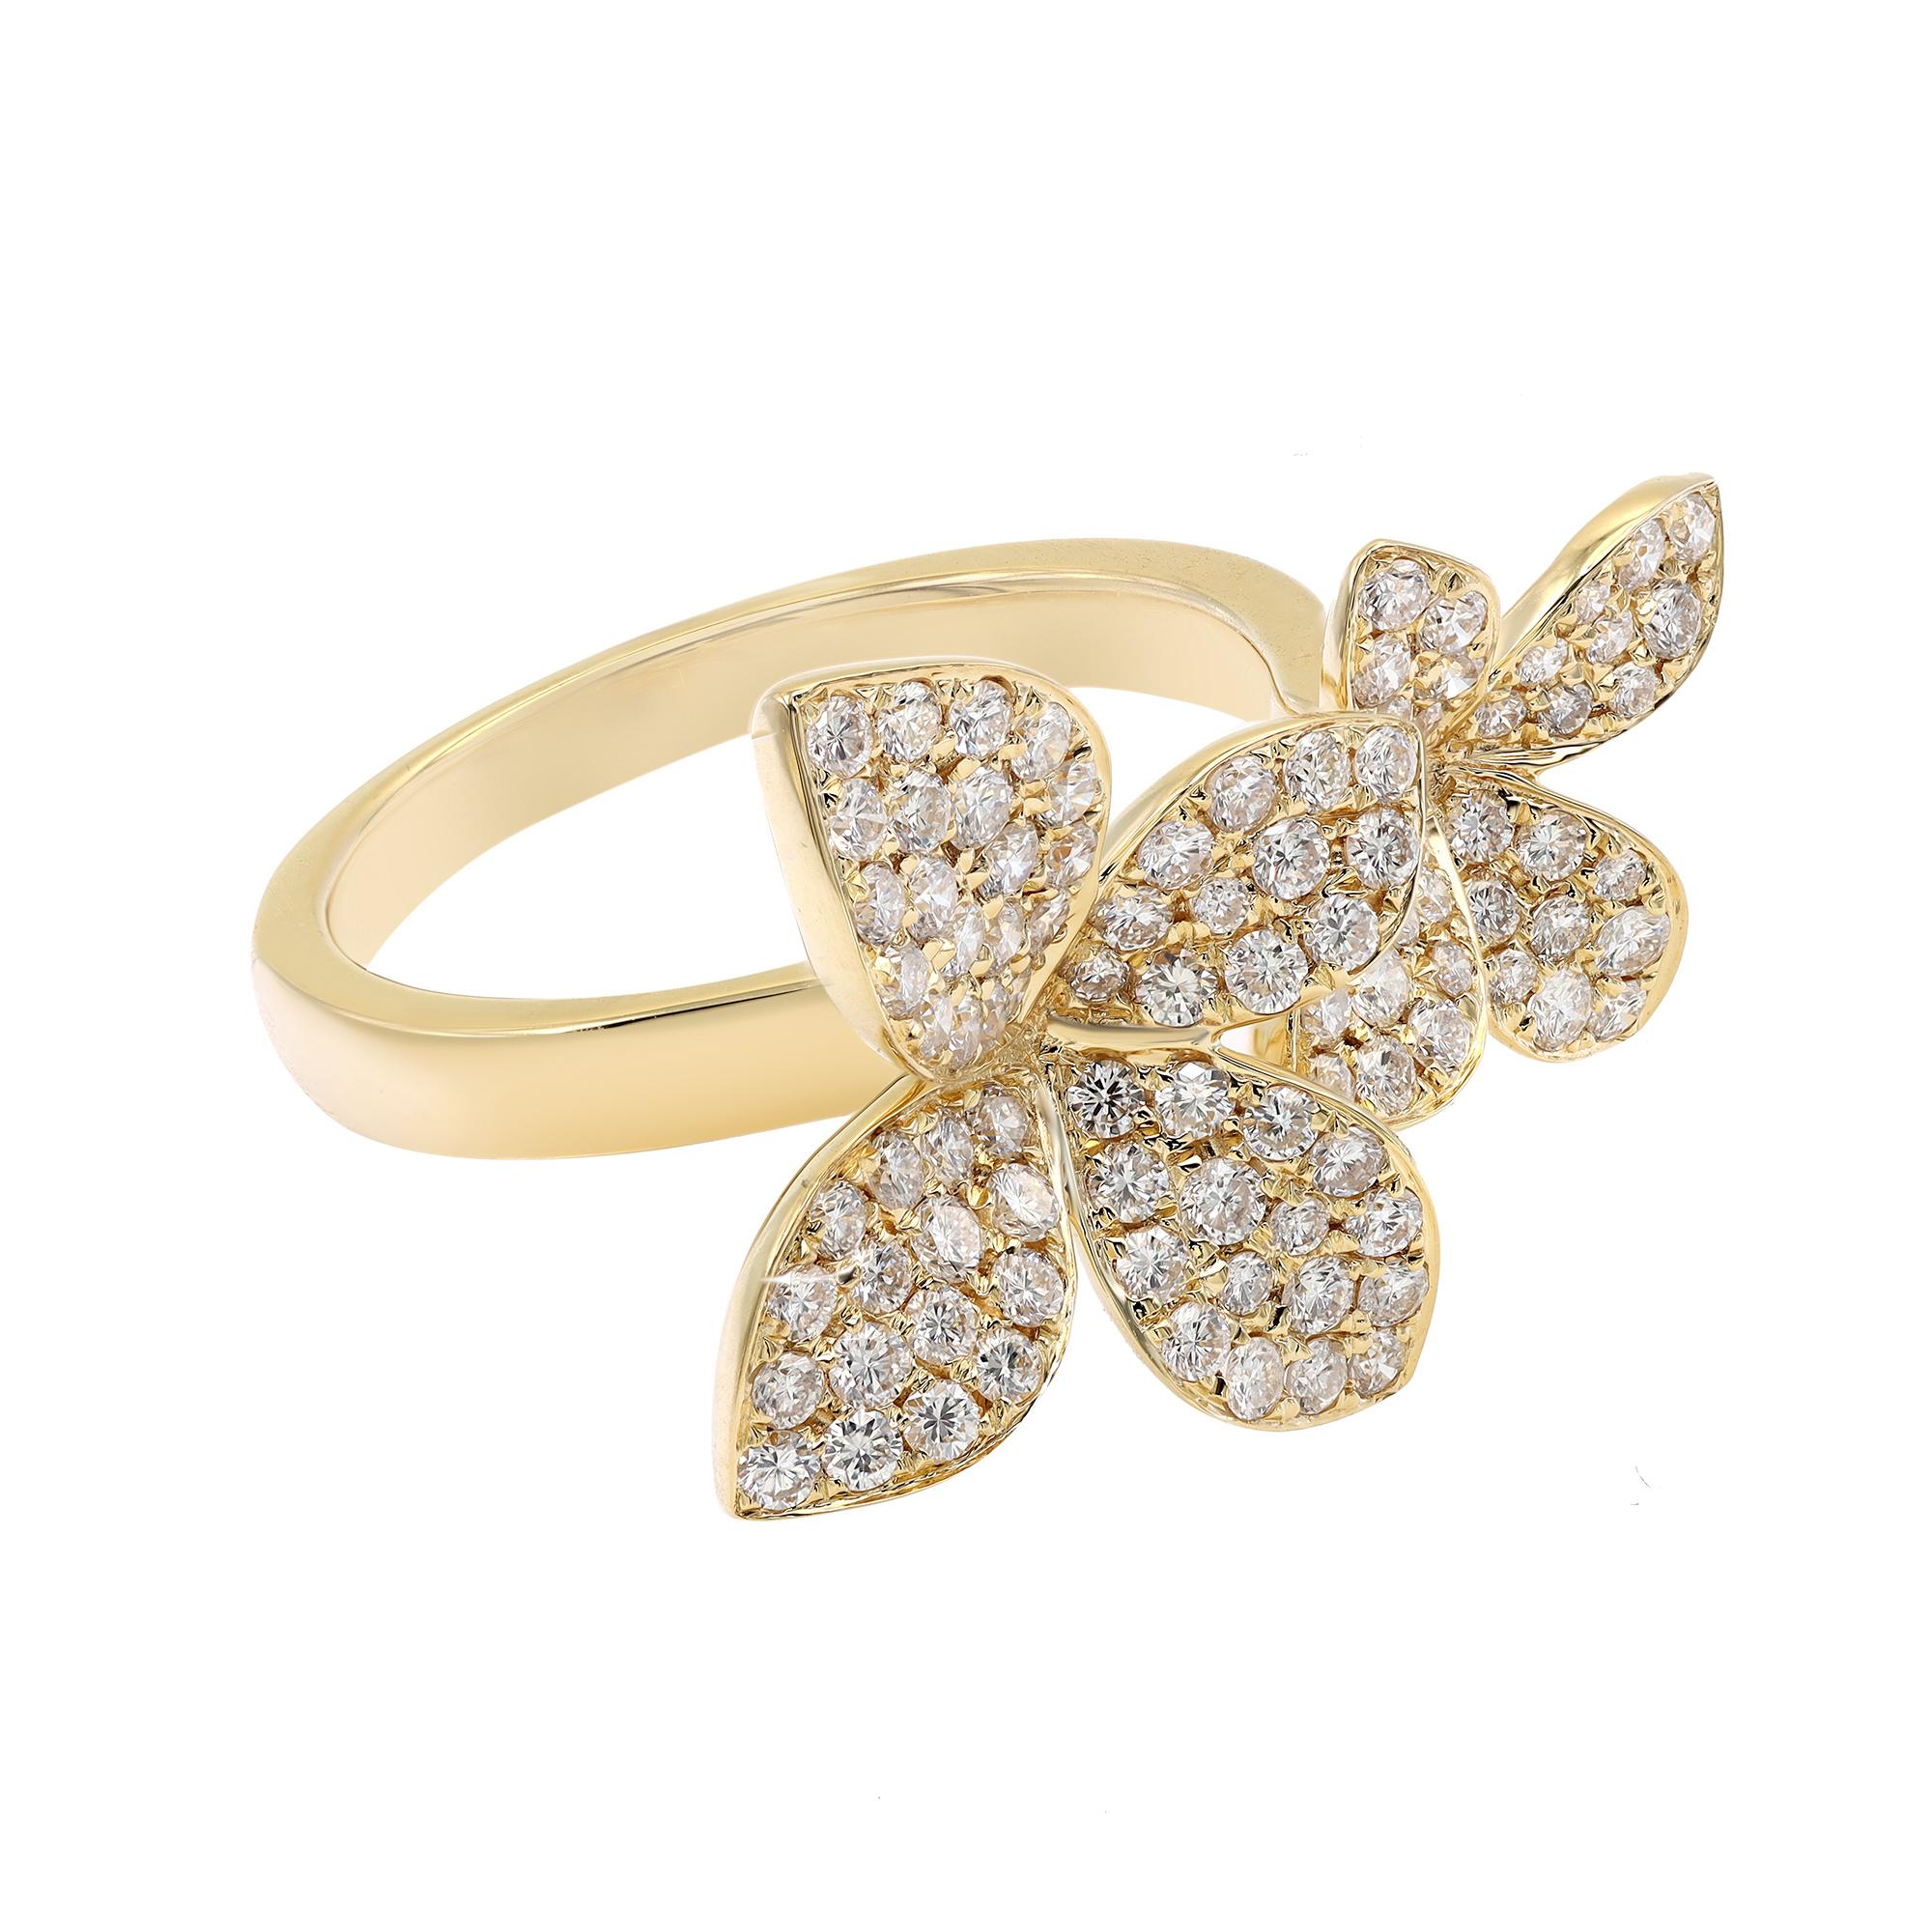 Fun and beautiful diamond double flower cocktail ring. This ring features two beautifully crafted flowers in 18k yellow gold, encrusted with dazzling round cut diamonds. A great pick for any occasion. Total diamond weight: 0.98 carat. Diamond